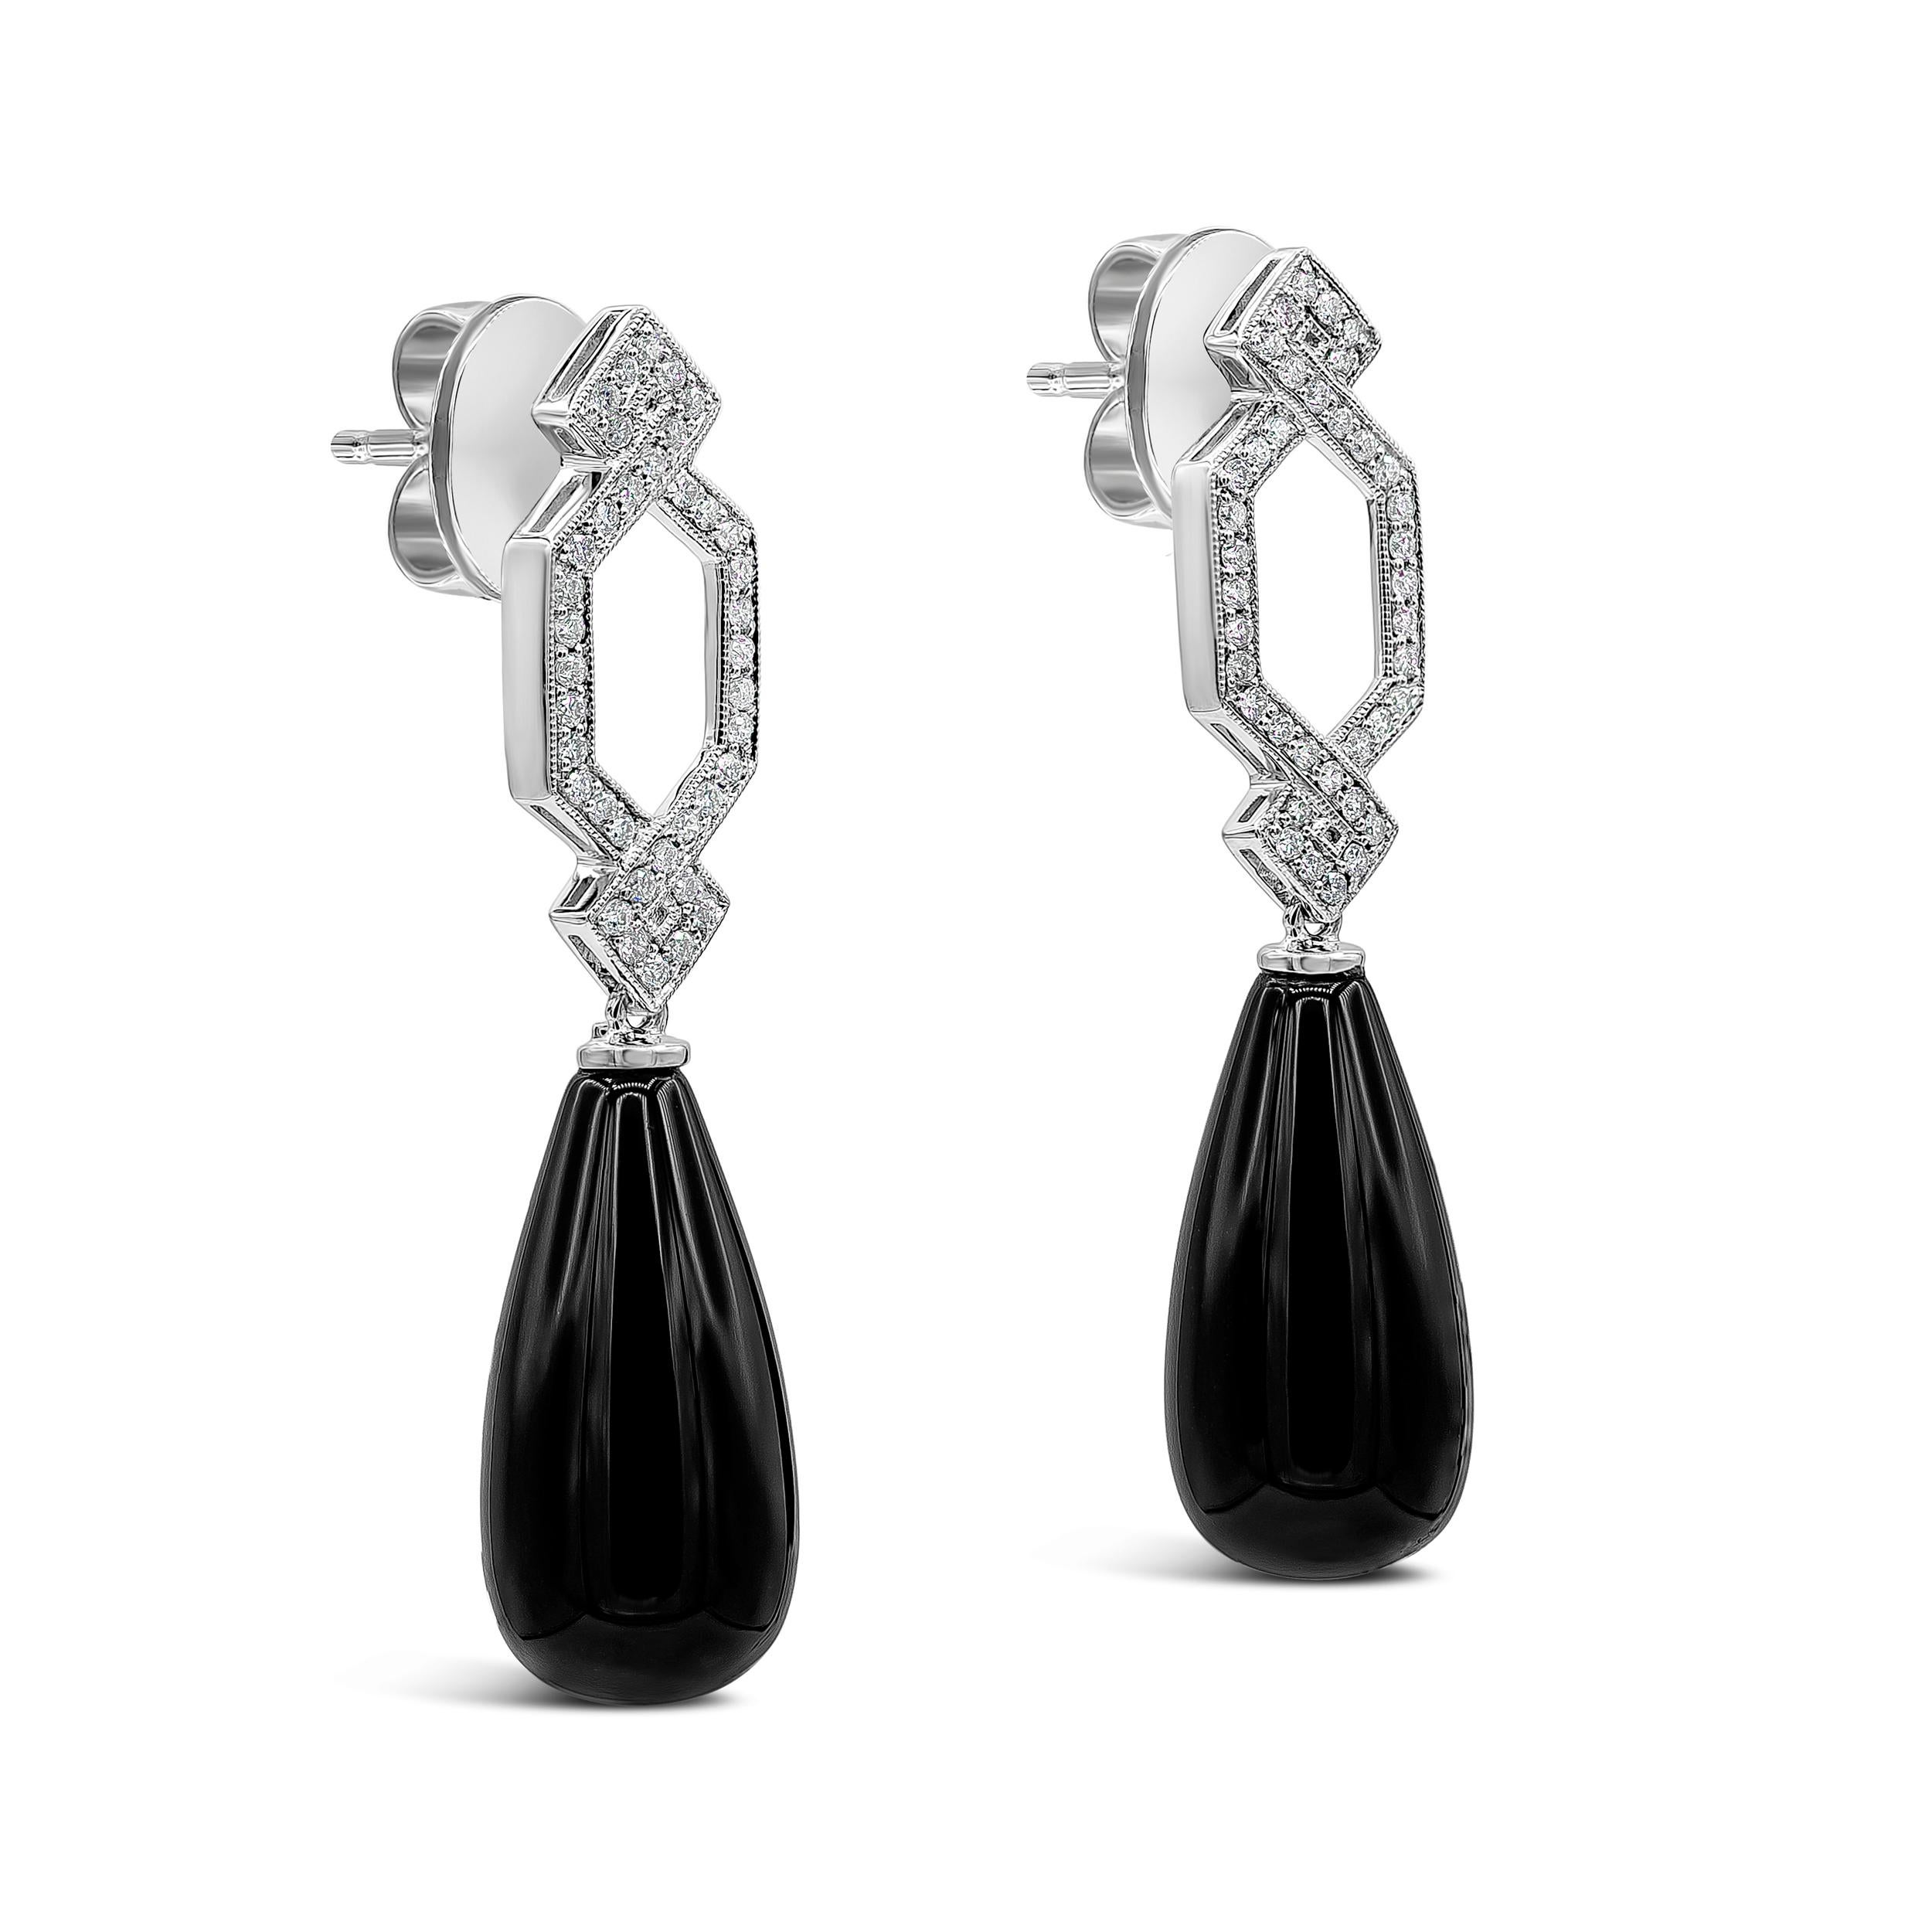 A stylish dangle earrings showcasing a pear shape drop onyx suspended in a diamond crossover made in 18 karat white gold. Diamonds weigh 0.28 carats total.

